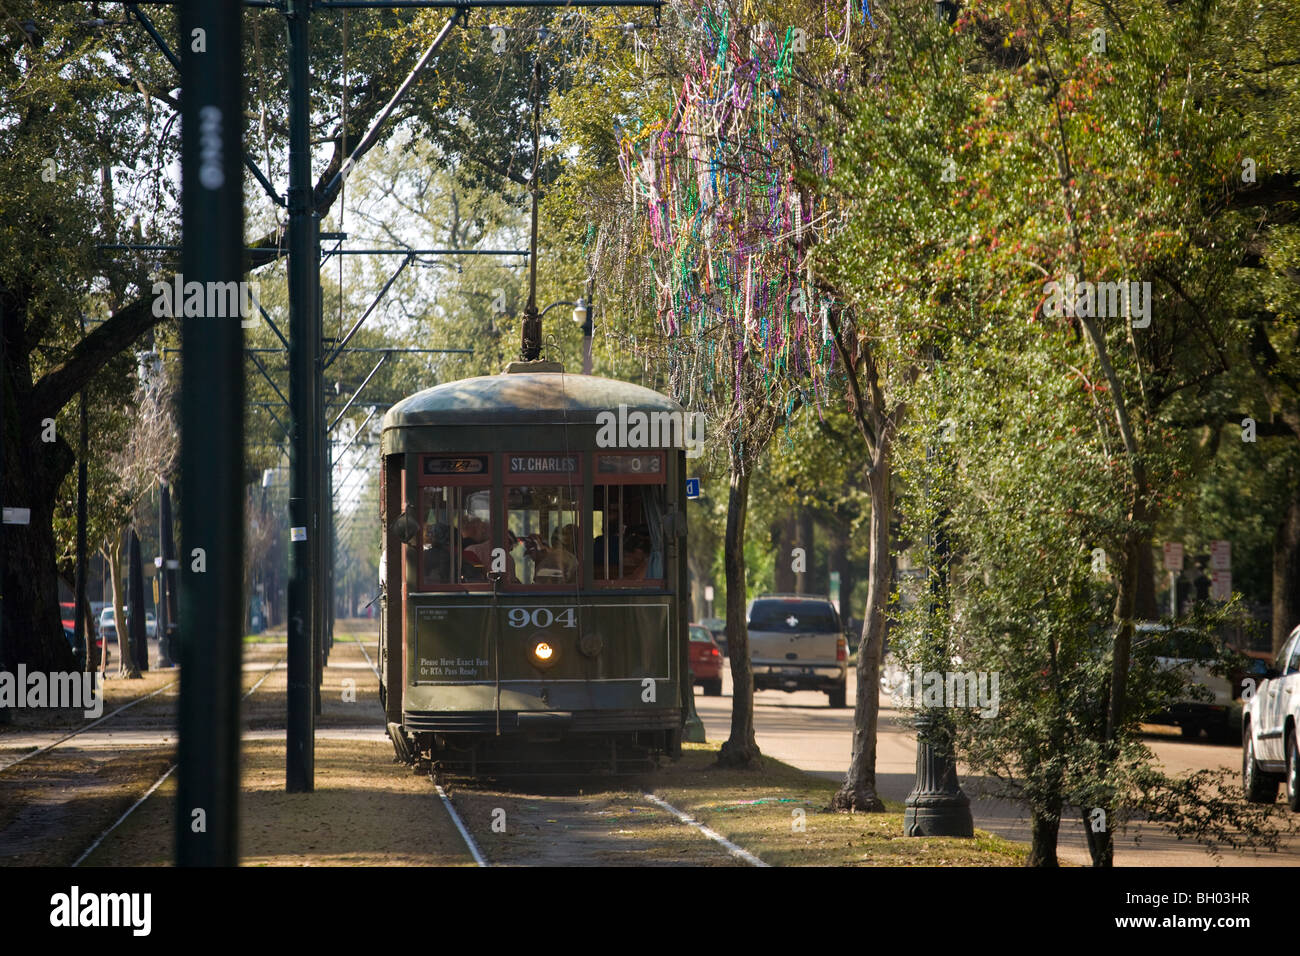 St. Charles Streetcar passing under beads hung tree, Garden District, New Orleans, Louisiana Stock Photo